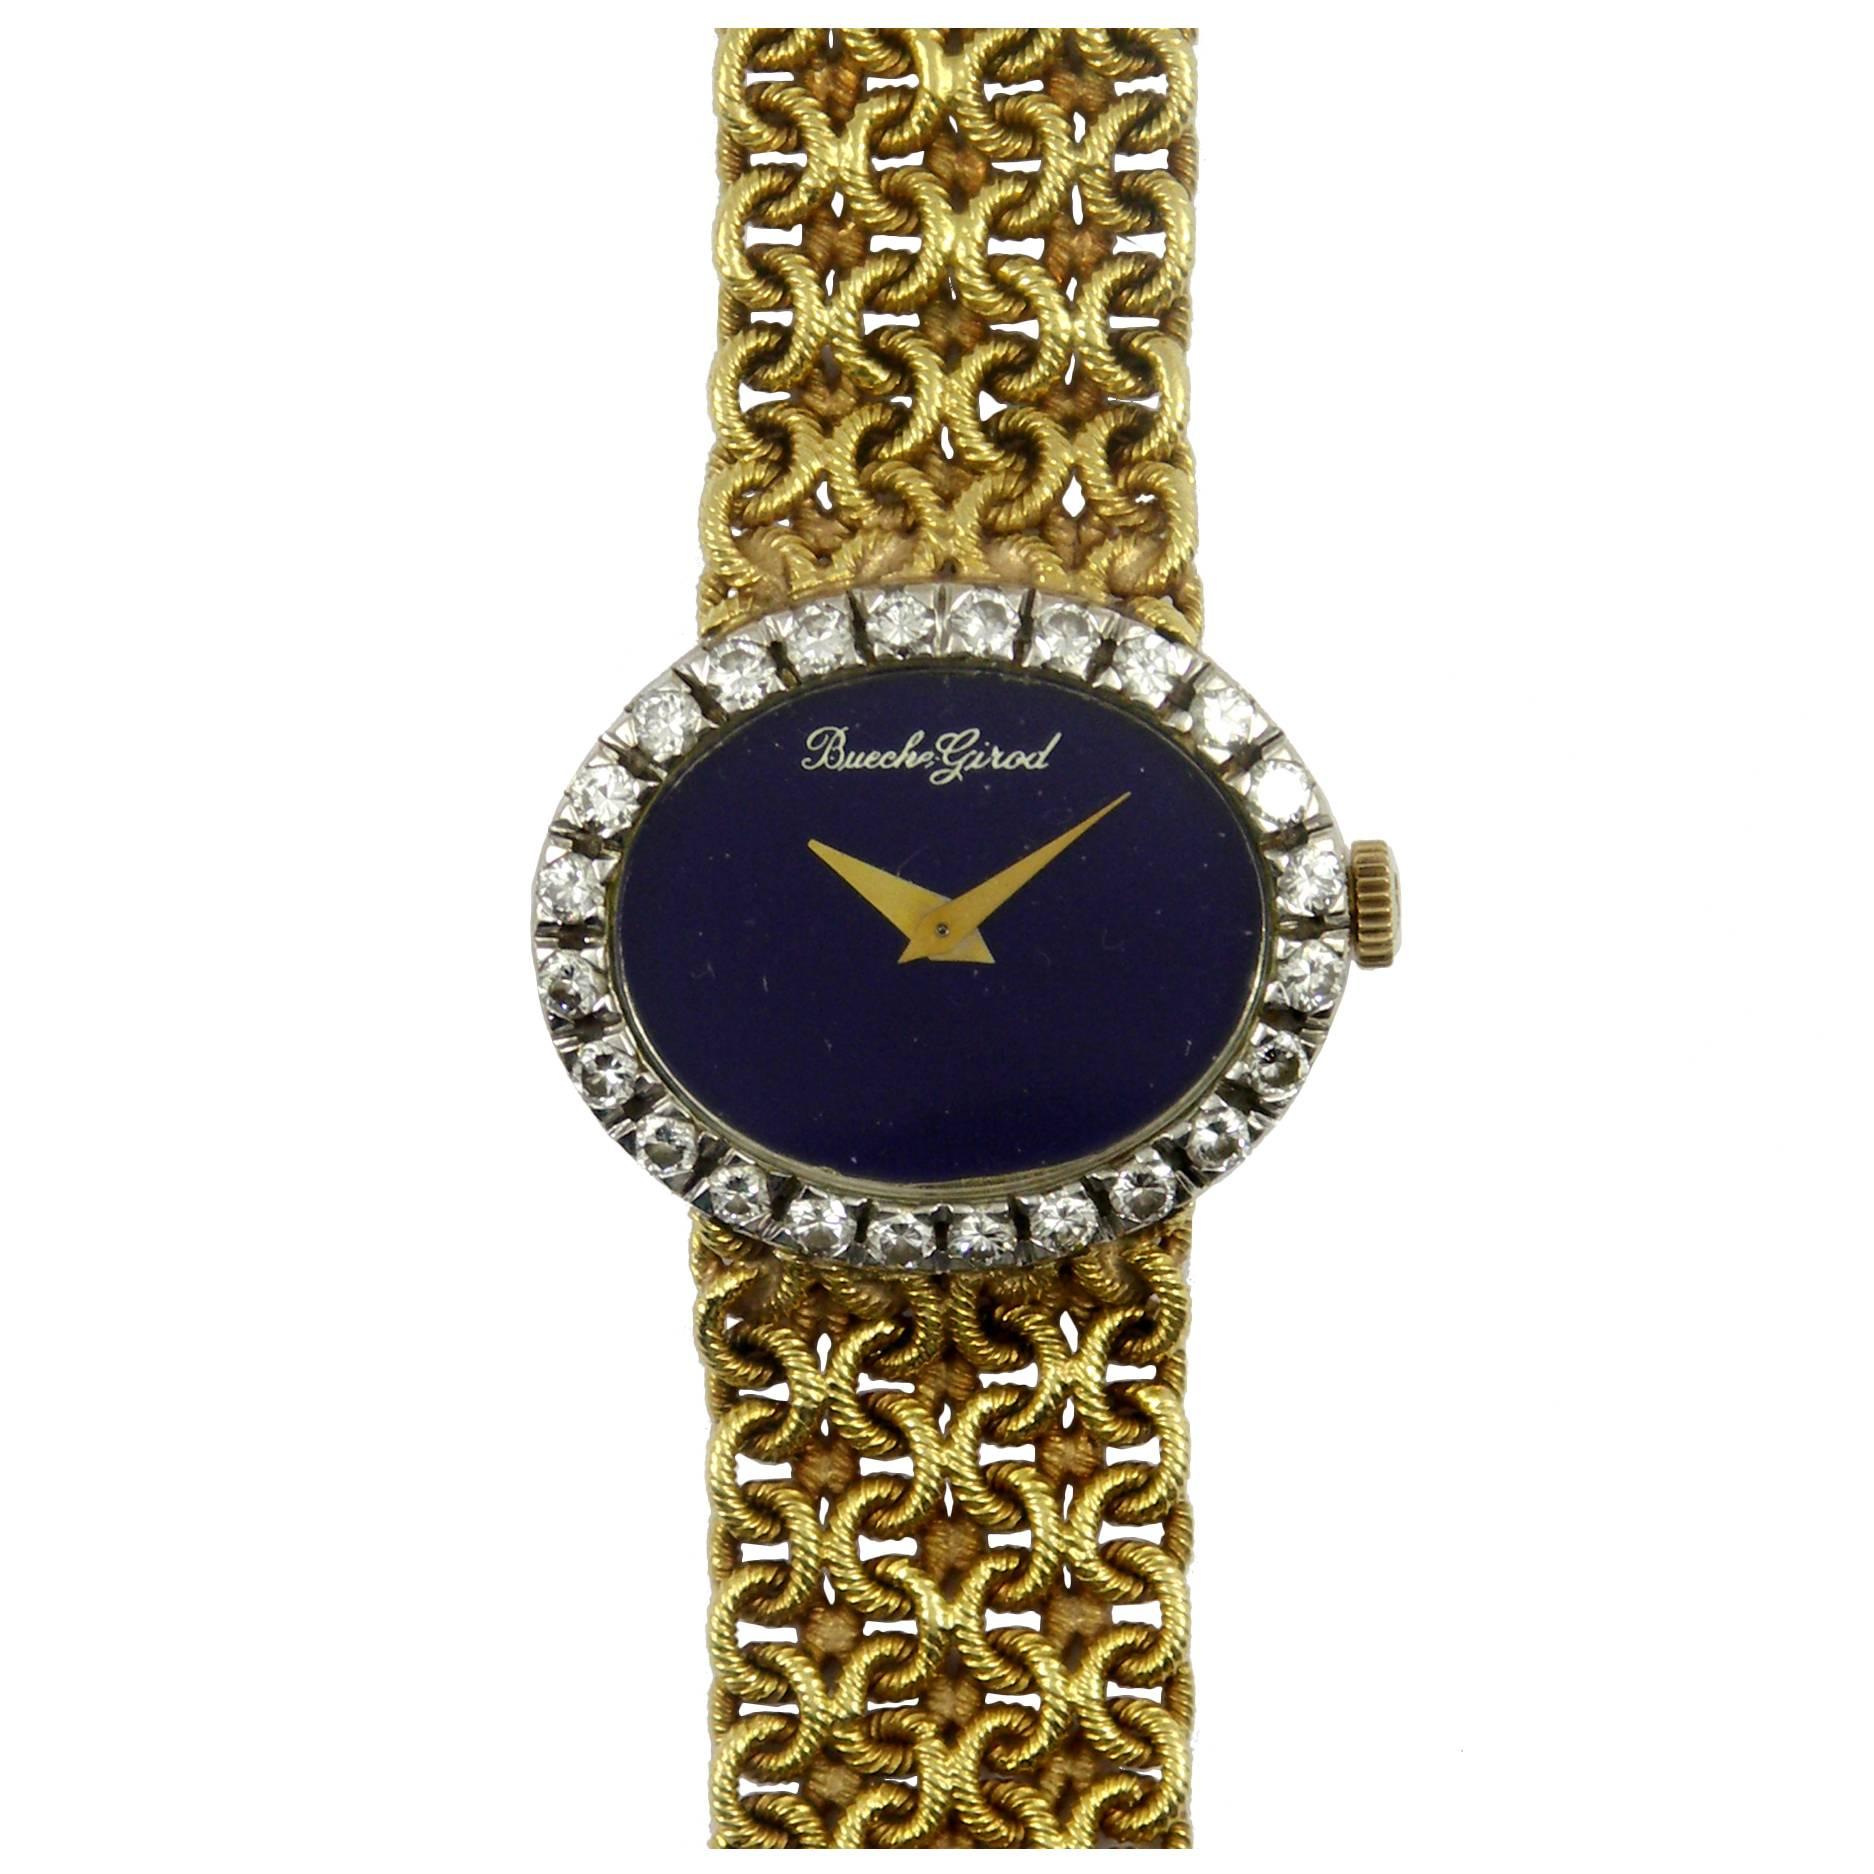 Beuche-Girod Lady's Yellow Gold and Diamond Braclet Watch with Lapis Dial